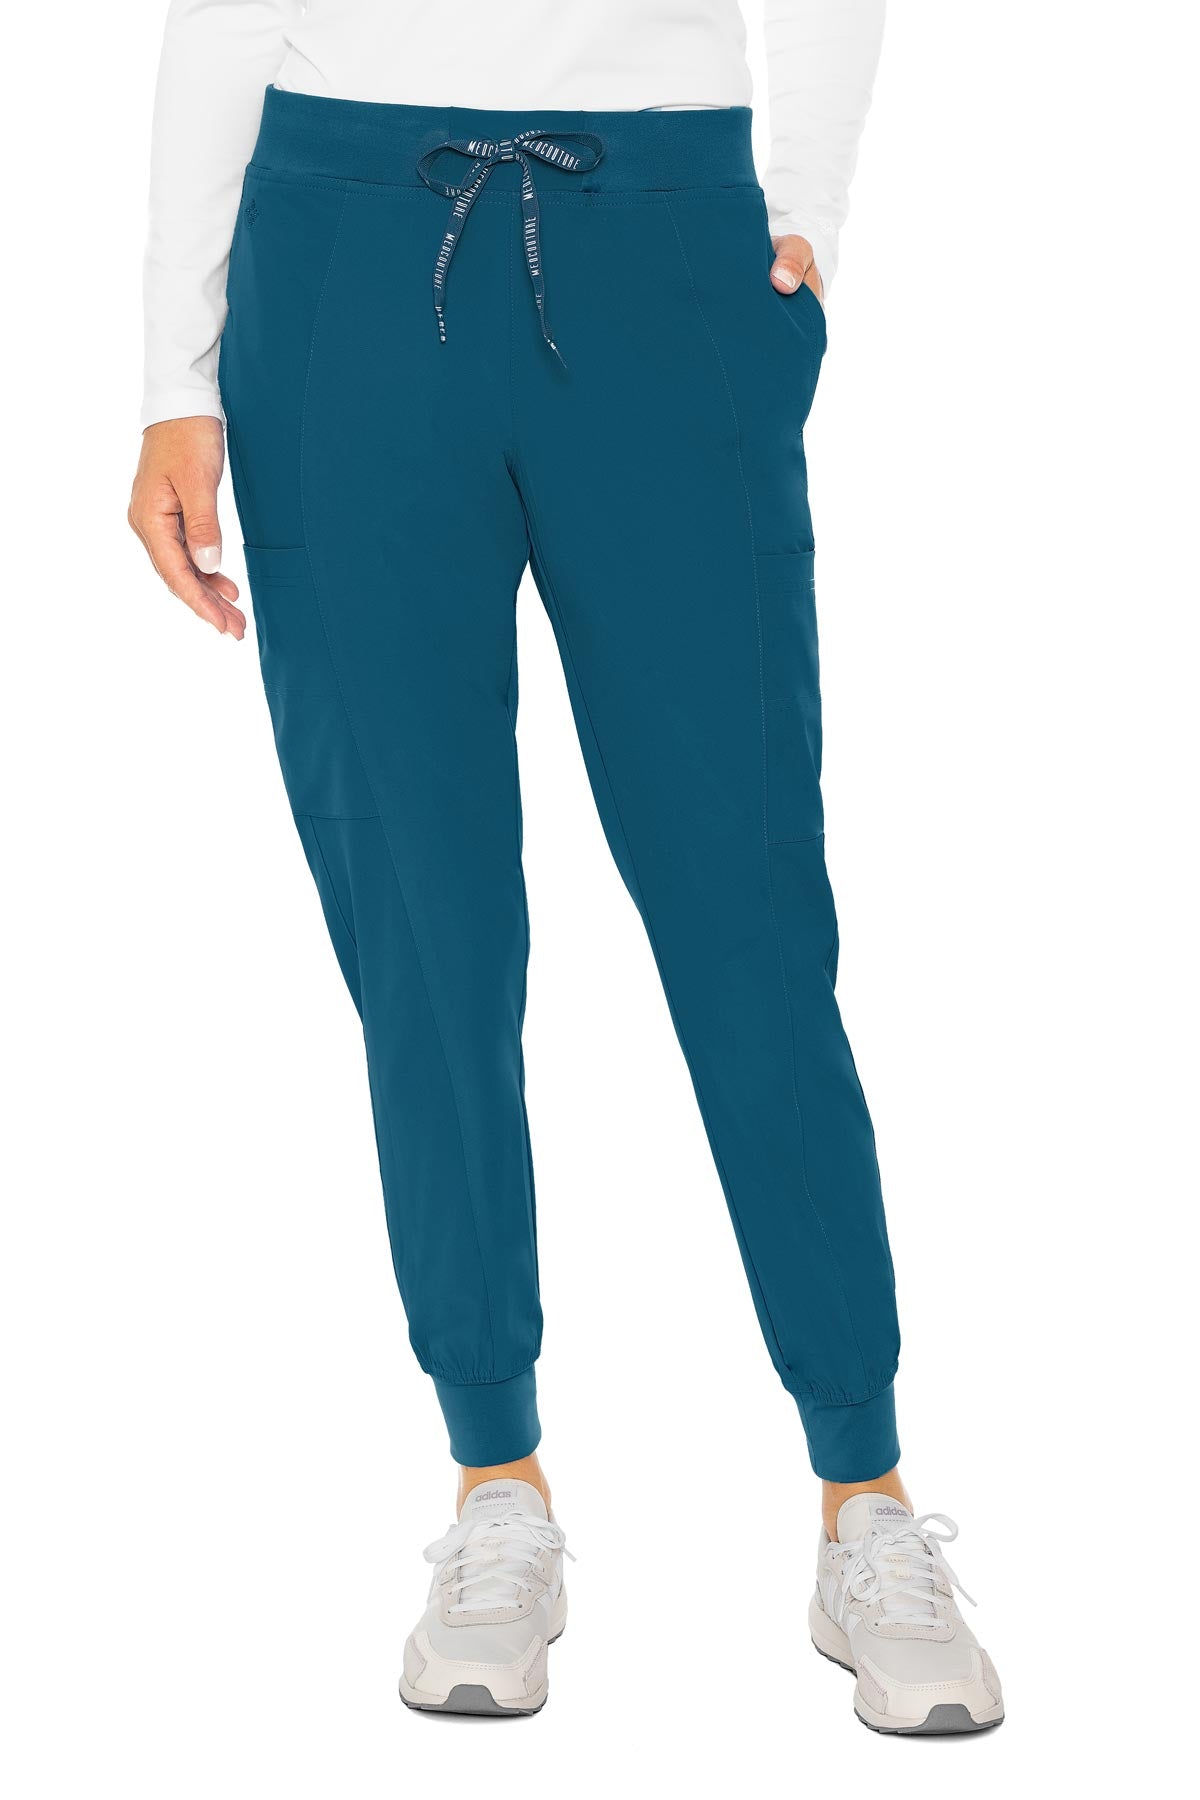 Med Couture Peaches Seamed Jogger Petite Length (XS-XL) – Berani Femme  Couture Scrubwear & Medical Supply